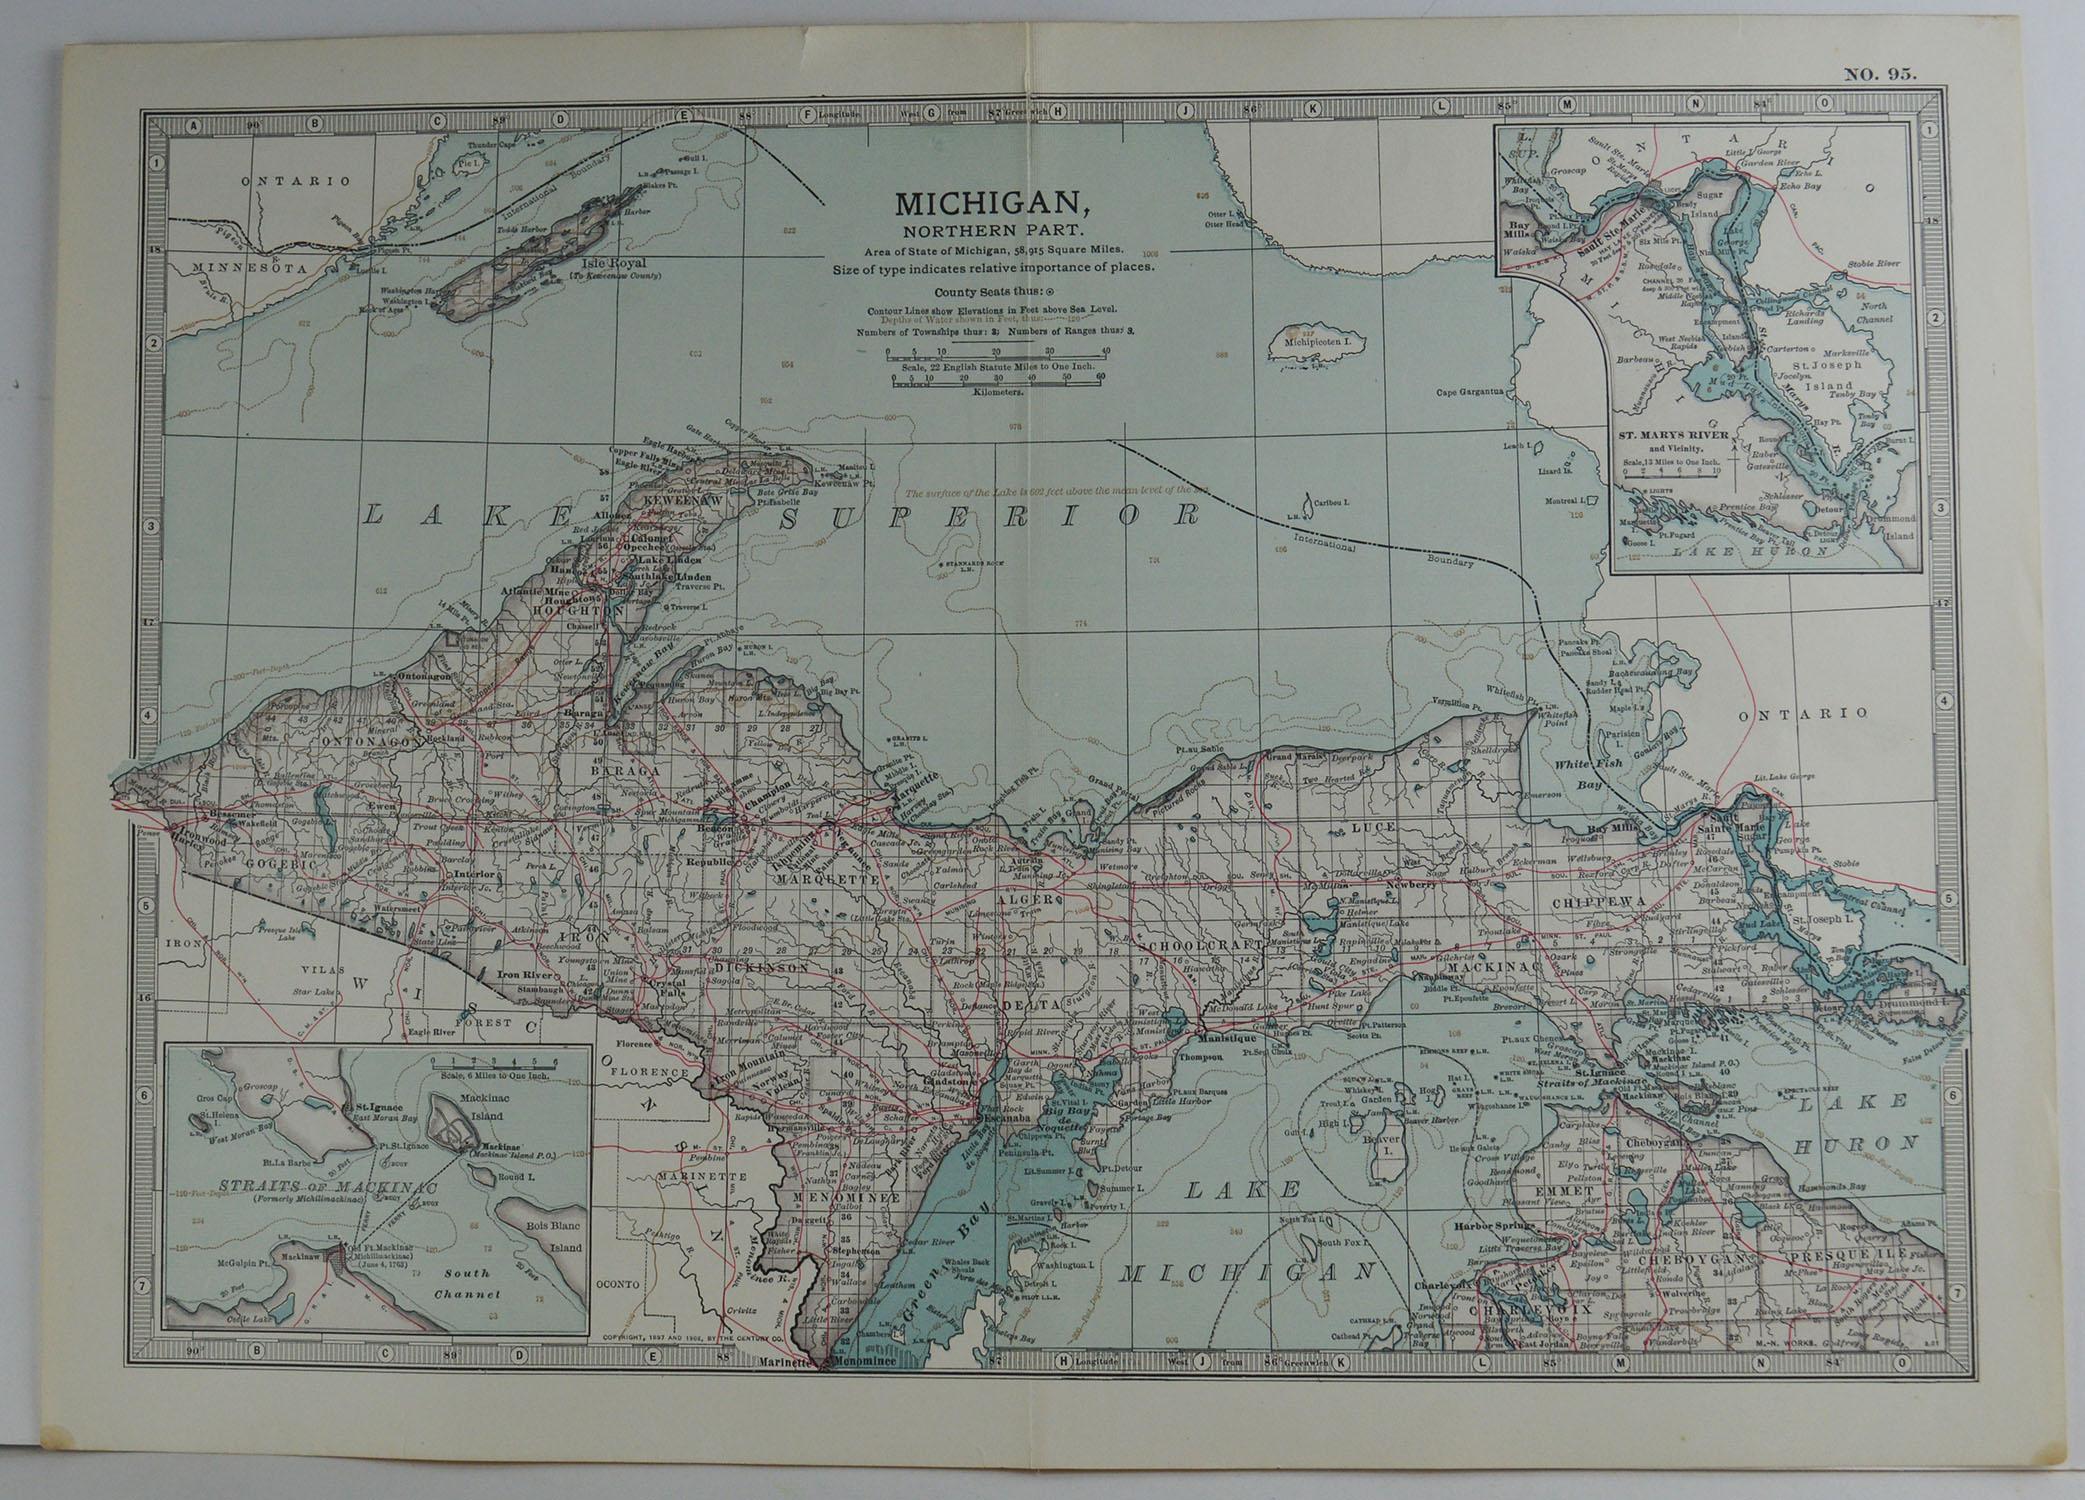 Great map of the Northern Part of Michigan

Original color.

Published circa 1890

Unframed.

Minor edge tears.
 